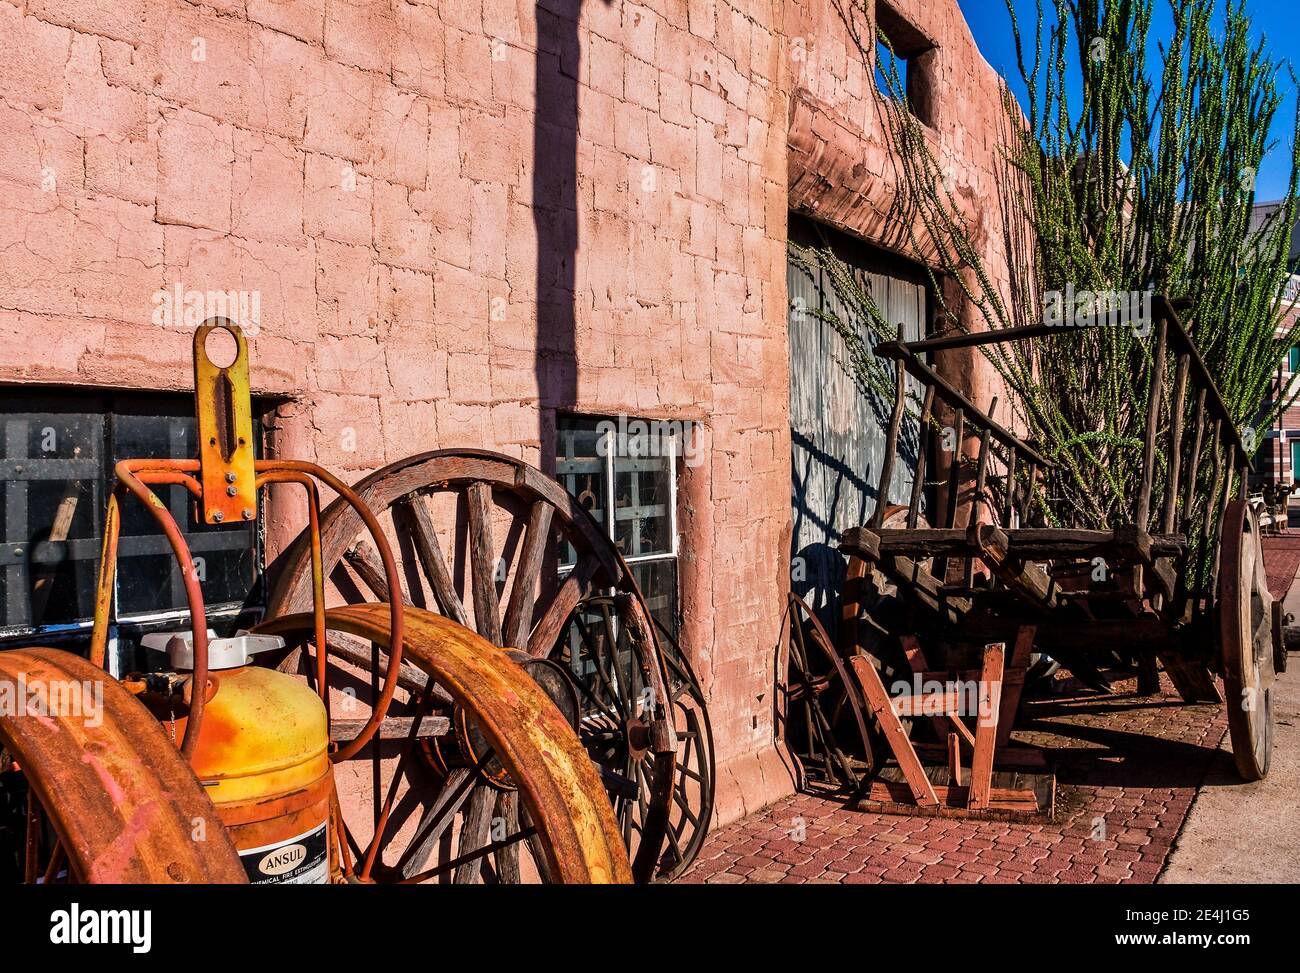 Old Wooden Cart and Fire Fighting Equipment  in Old Town, Scottsdale, Arizona, USA Stock Photo